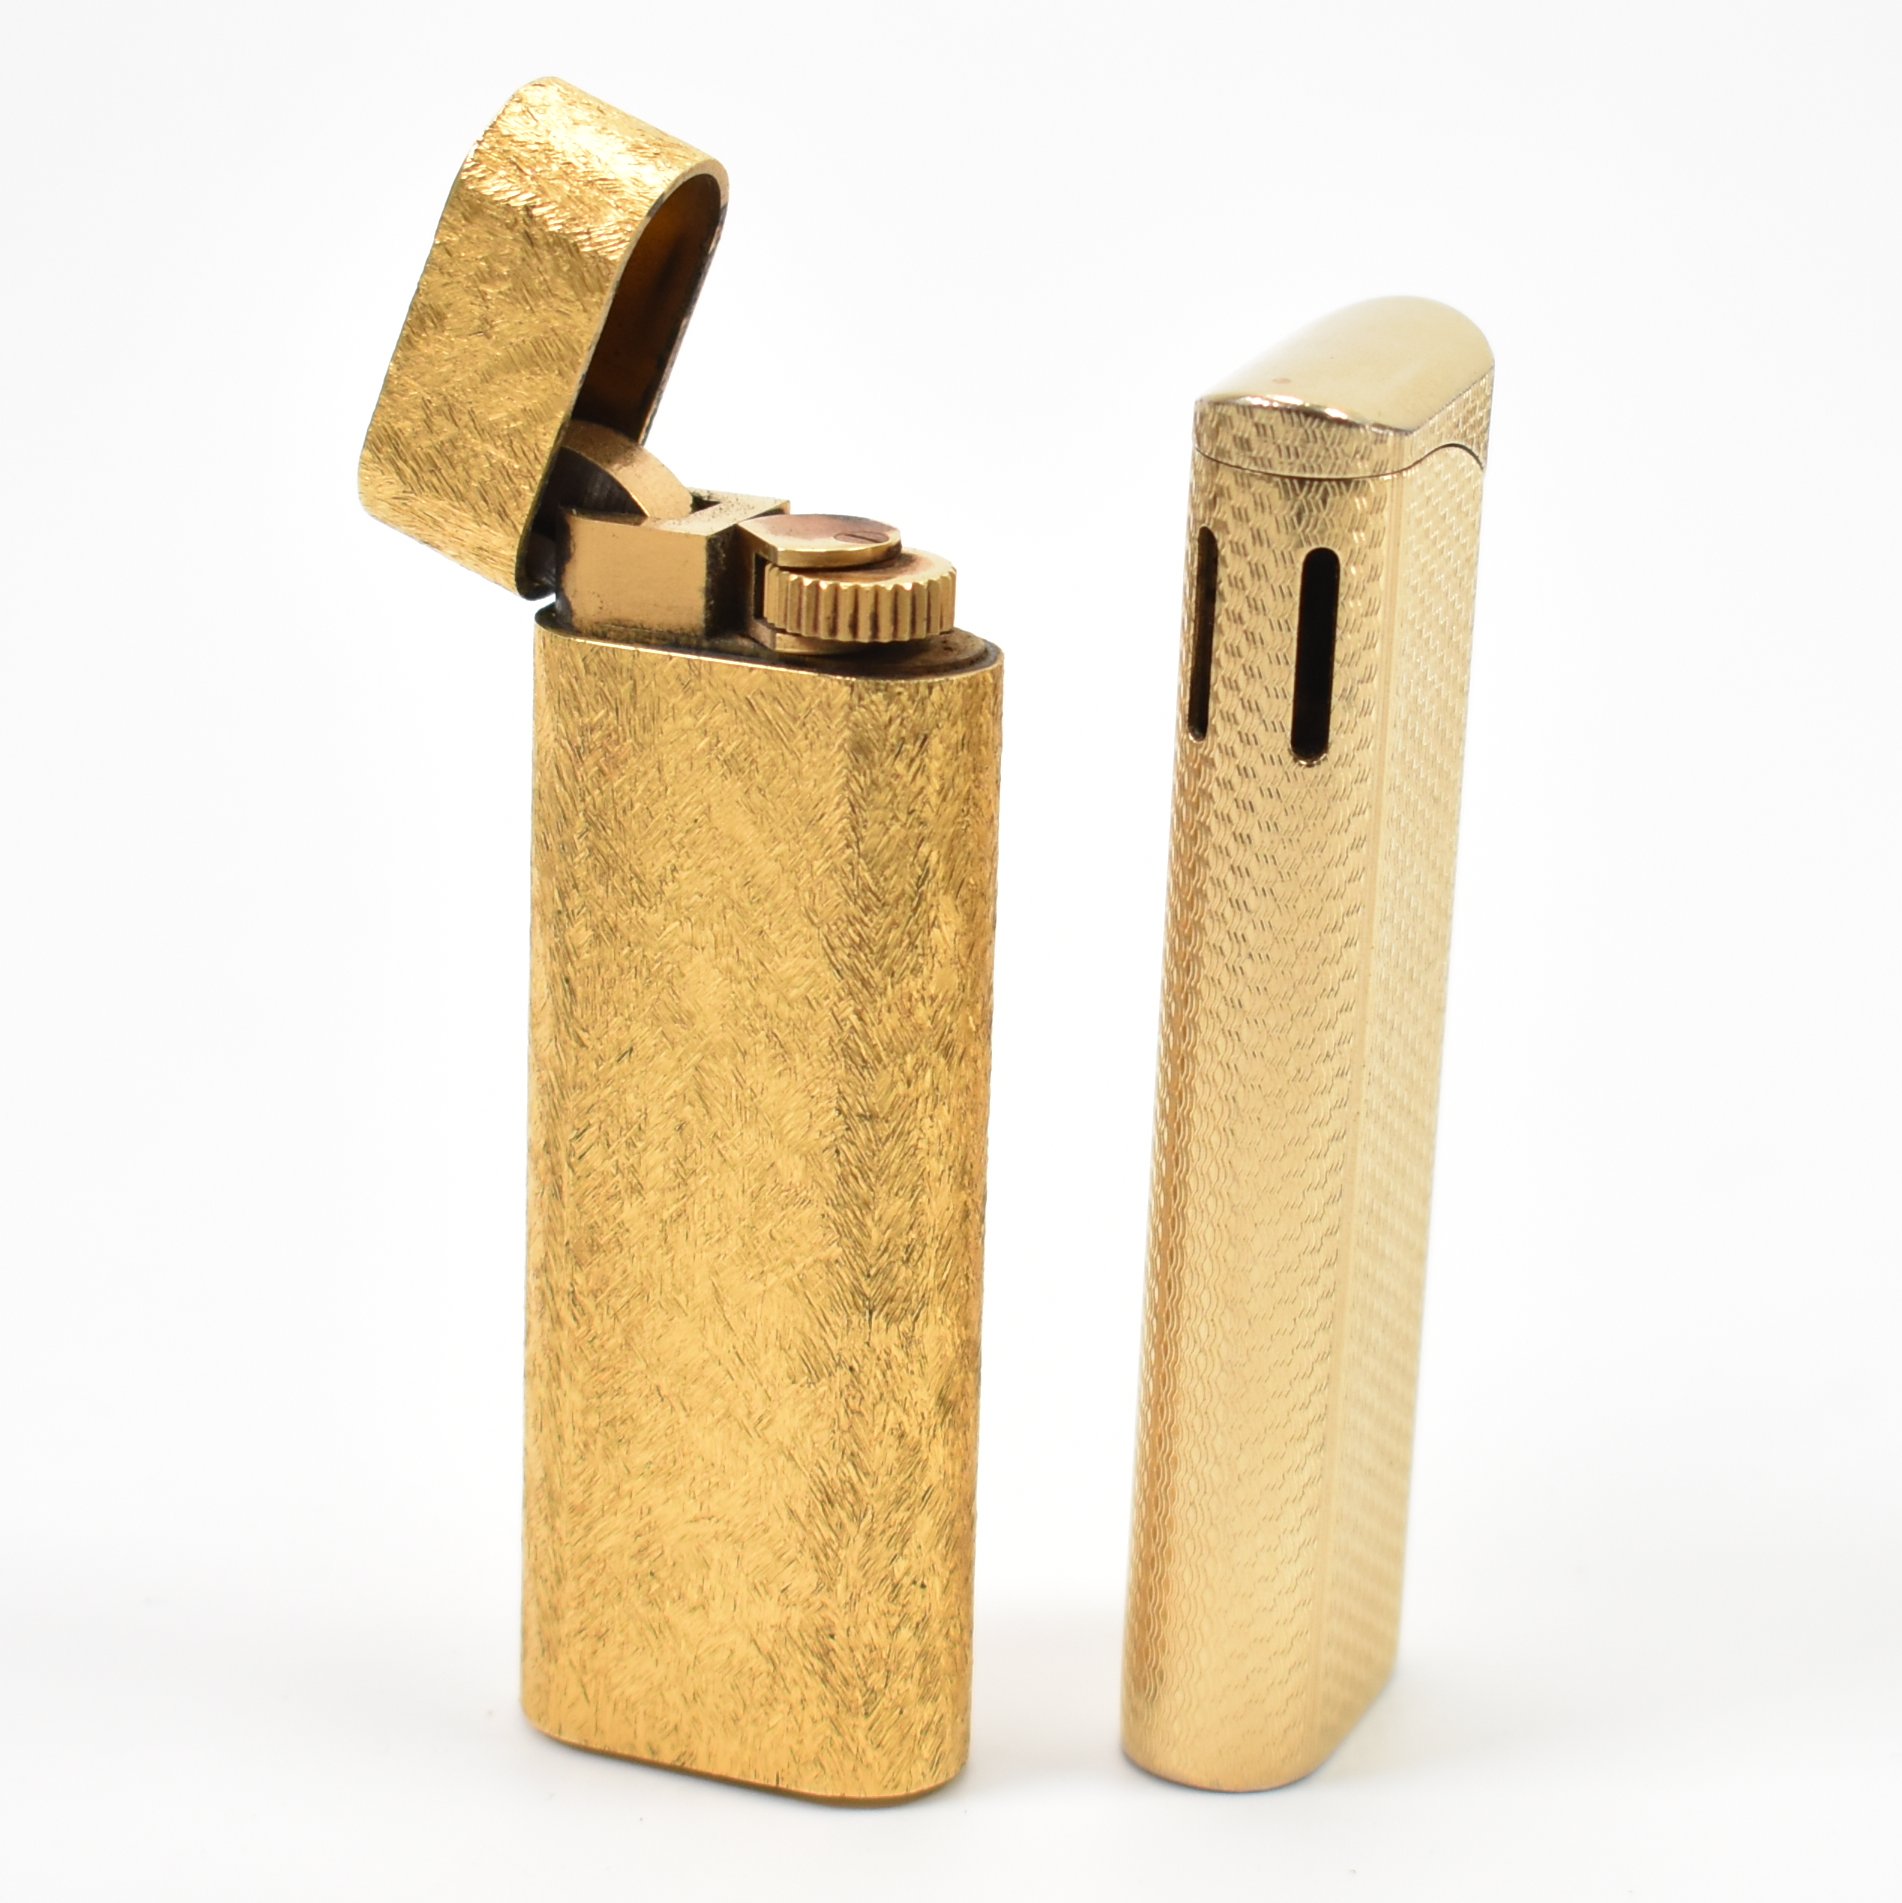 2 VINTAGE ELECTRONIC LIGHTERS - CARTIER & COLIBRI - Image 3 of 5